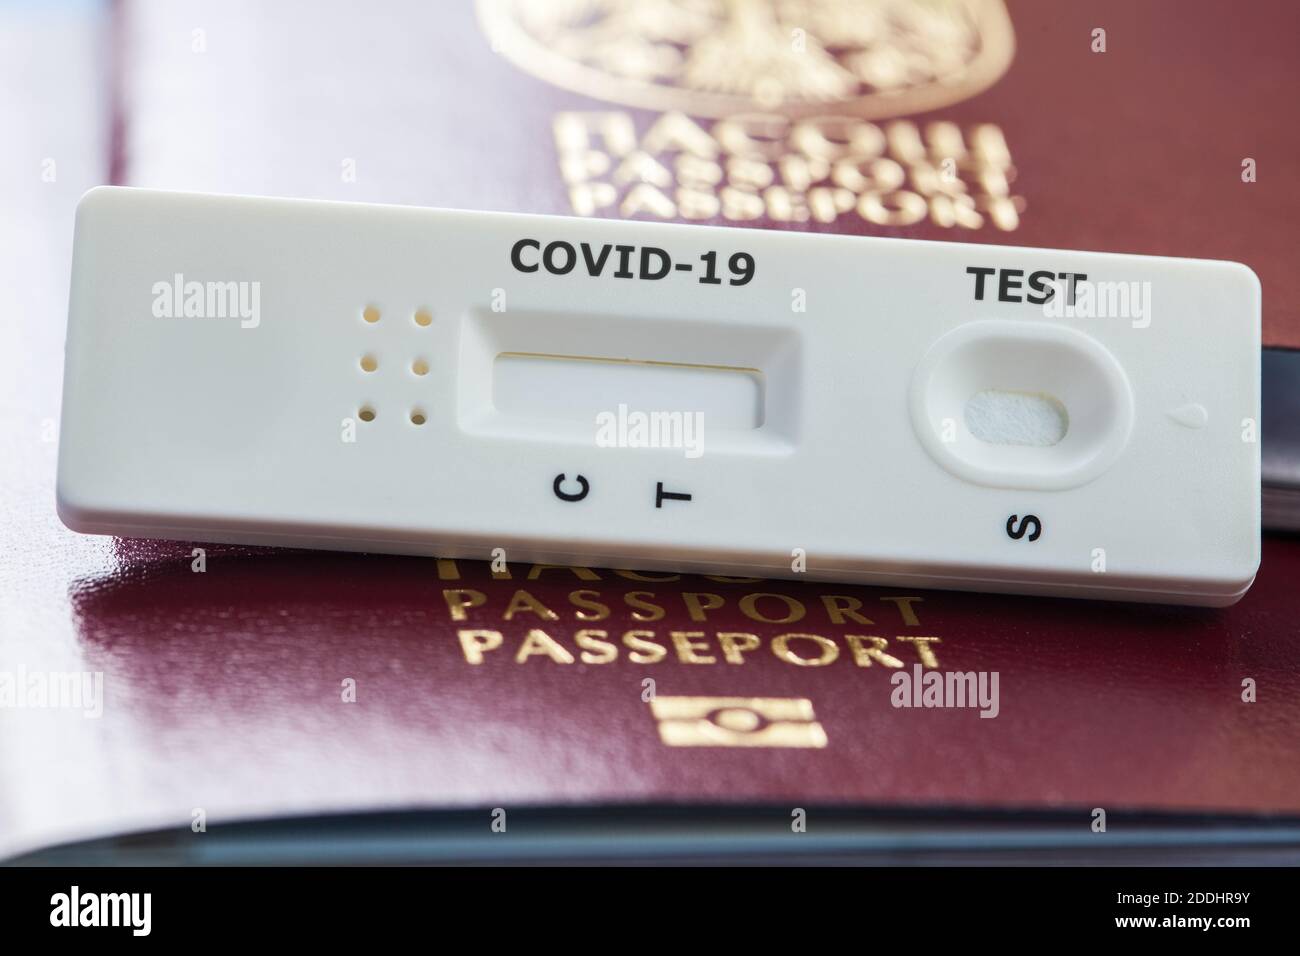 COVID-19 virus disease rapid testing, Coronavirus crisis, global pandemic outbreak, quick antibody test, airport security health and safety check Stock Photo